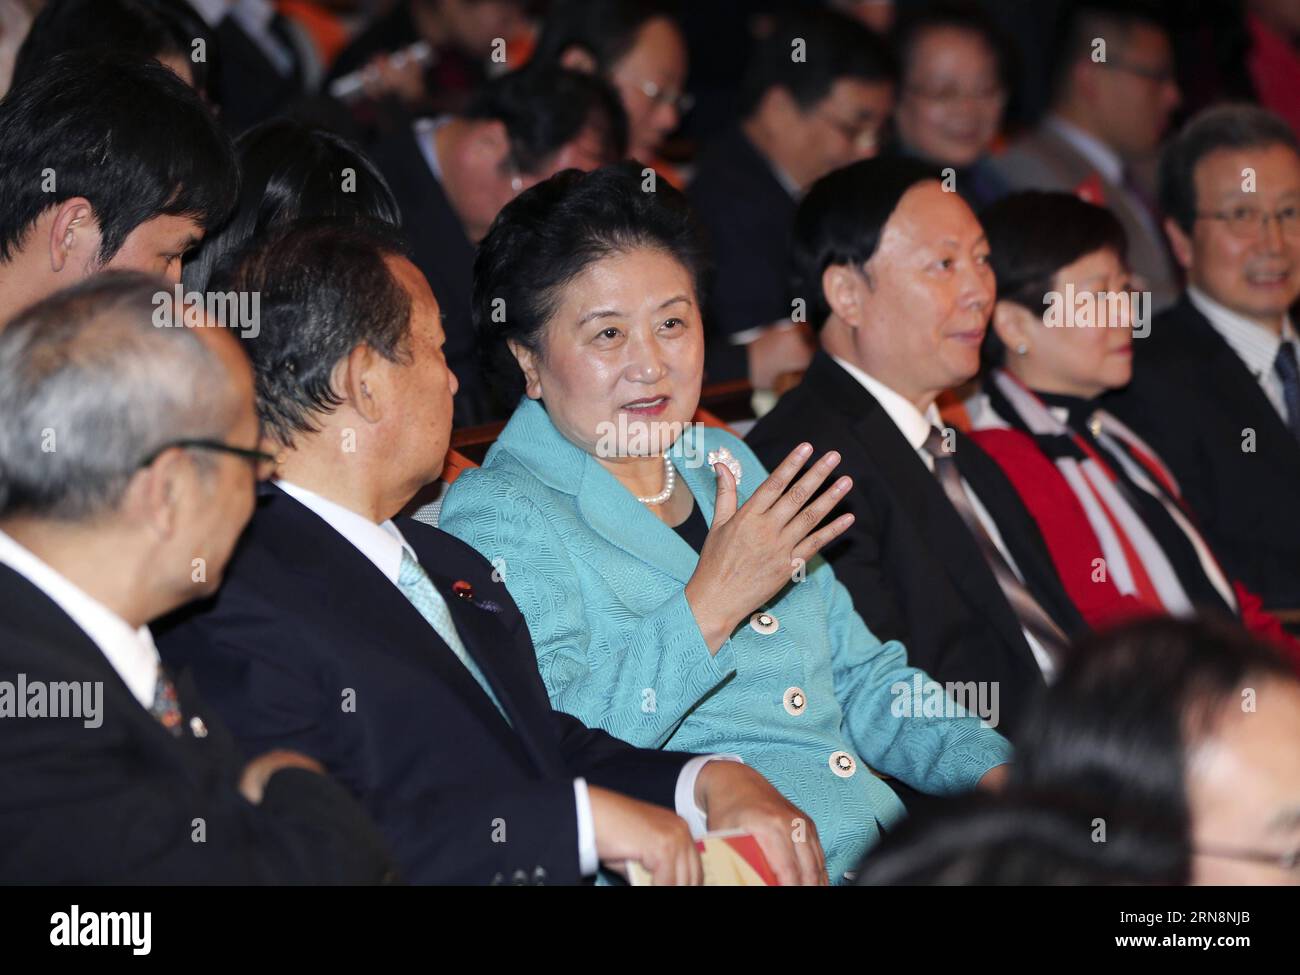 (151031) -- BEIJING, Oct. 31, 2015 -- Chinese Vice Premier Liu Yandong and Toshihiro Nikai, chairman of the General Council of Japan s ruling Liberal Democratic Party (LDP) watch a performance in Beijing, capital of China, Oct. 31, 2015. ) (yxb) CHINA-BEIJING-LIU YANDONG-JAPANESE GUESTS-MEETING(CN) DingxLin PUBLICATIONxNOTxINxCHN   Beijing OCT 31 2015 Chinese Vice Premier Liu Yandong and Toshihiro Nikai Chairman of The General Council of Japan S ruling Liberal Democratic Party LDP Watch a Performance in Beijing Capital of China OCT 31 2015 yxb China Beijing Liu Yandong Japanese Guests Meeting Stock Photo